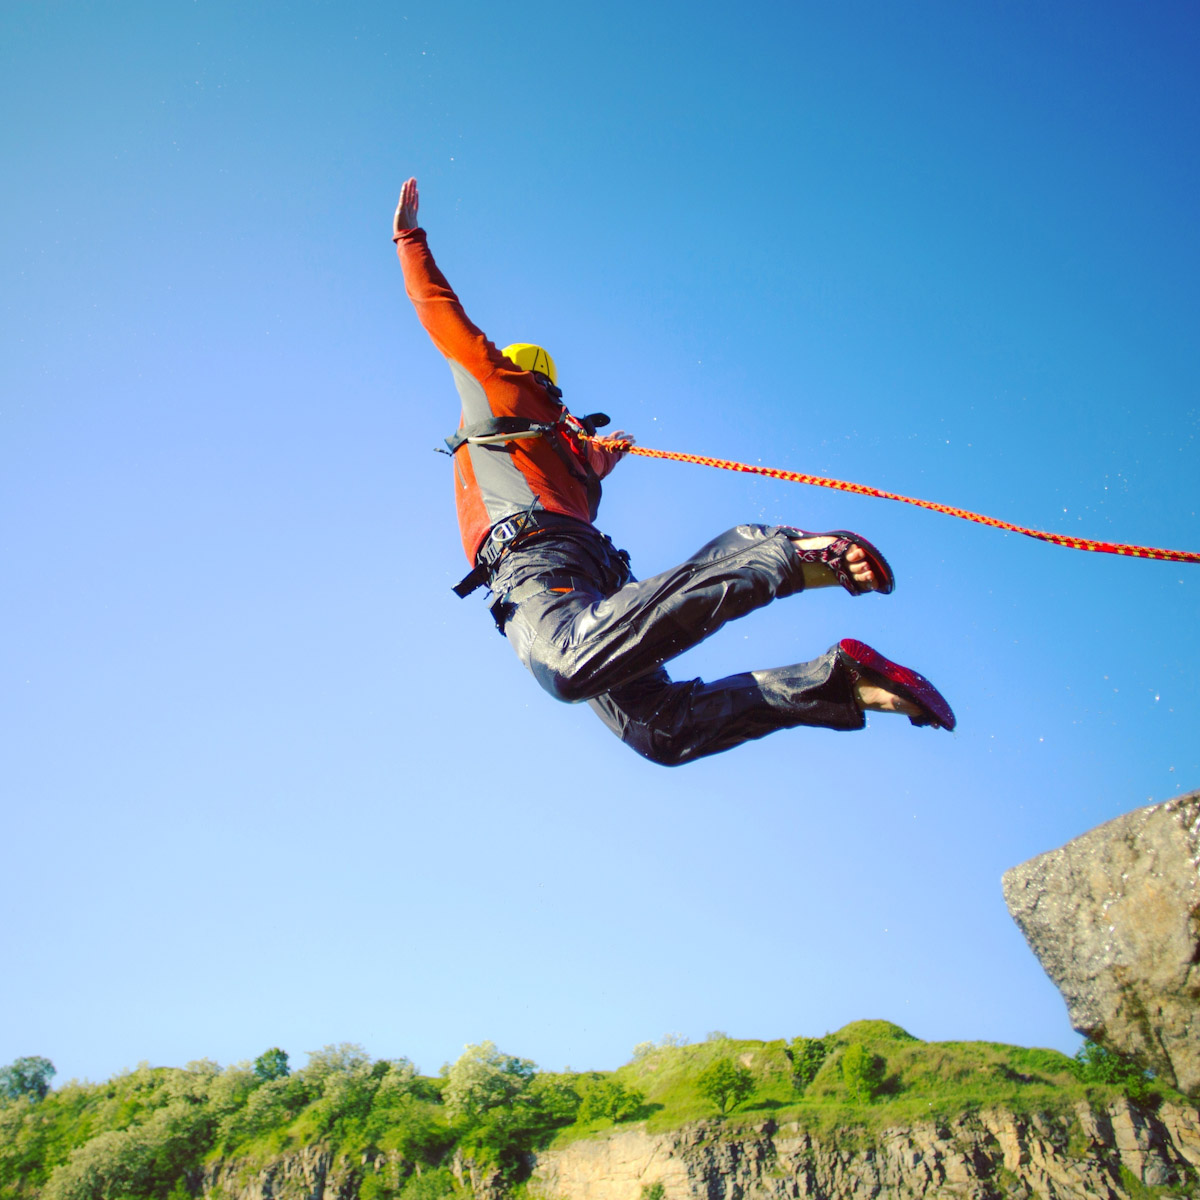 top-10-experiences-for-men-tinggly-bungee-man-for-himself